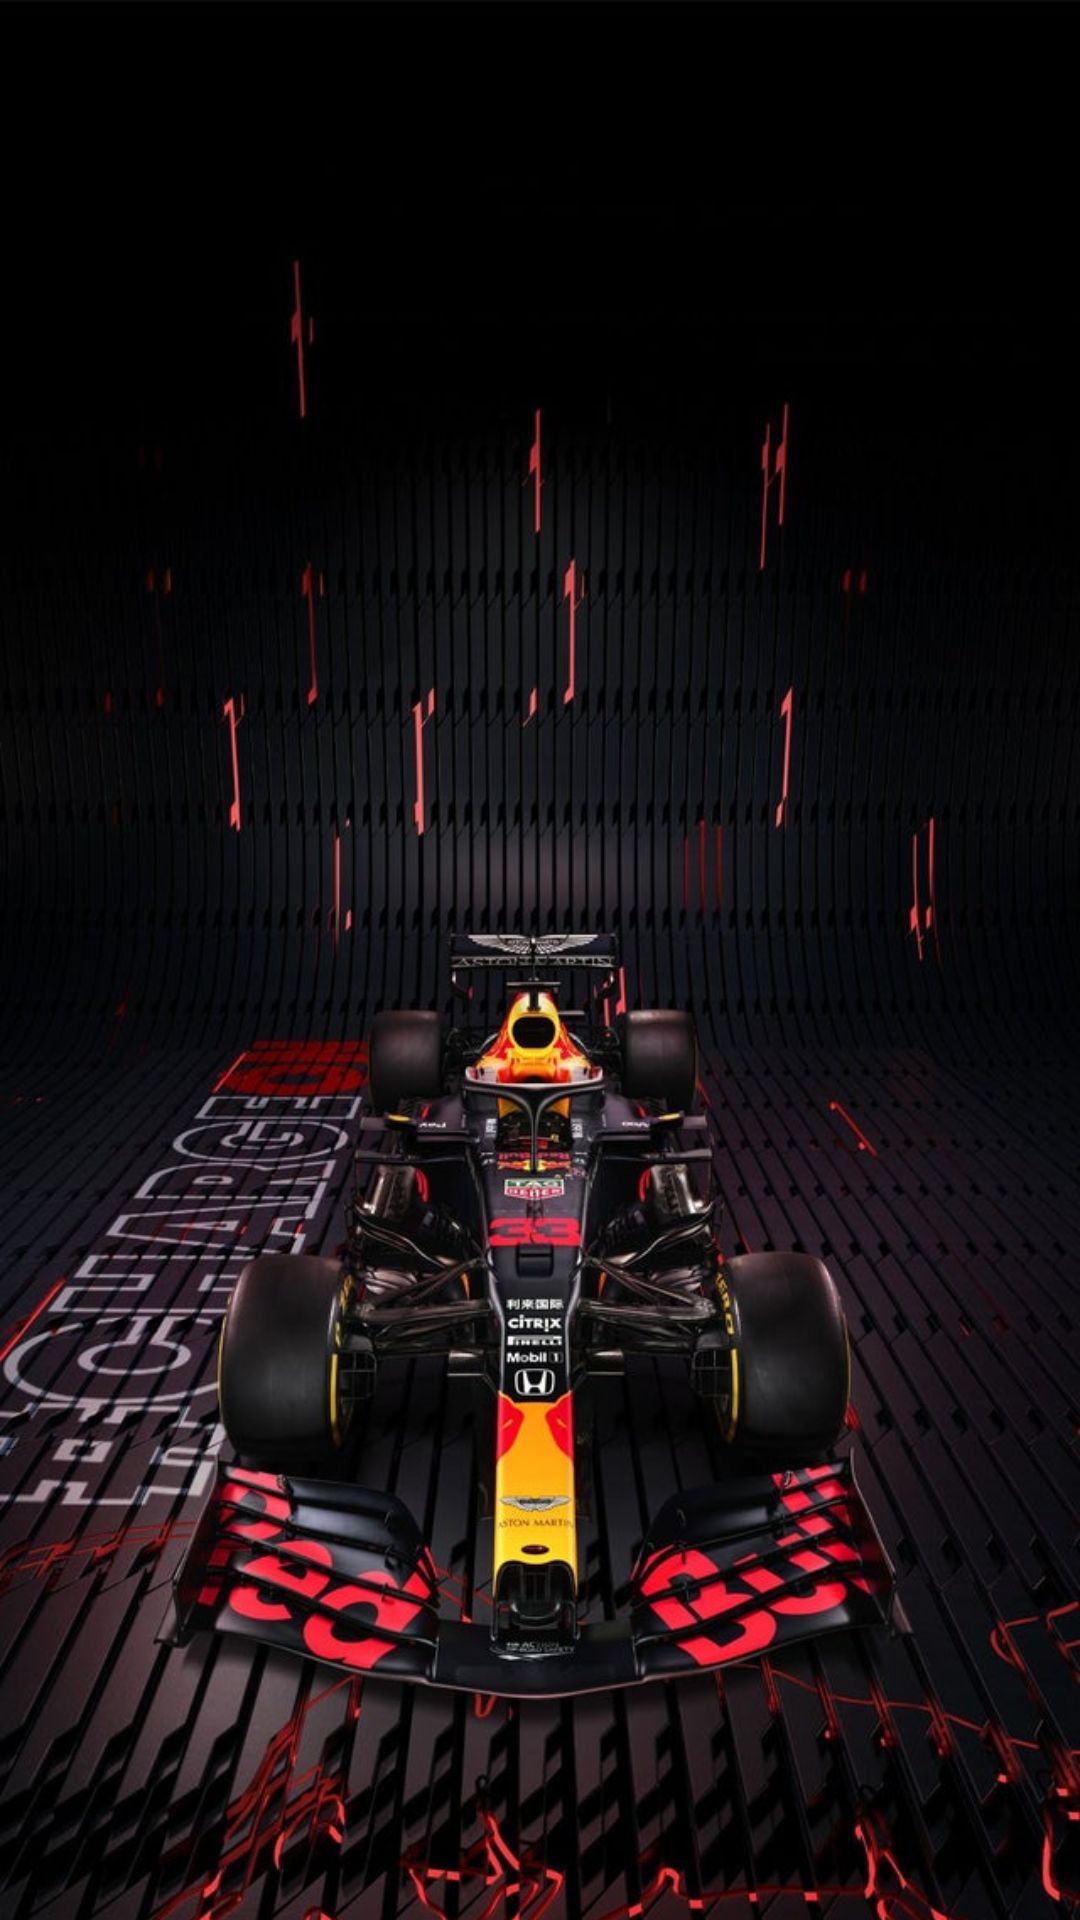 1080x1920 Red Bull F1 Racing Wallpapers Top 30 Best Red Bull F1 Racing Wallpapers Download